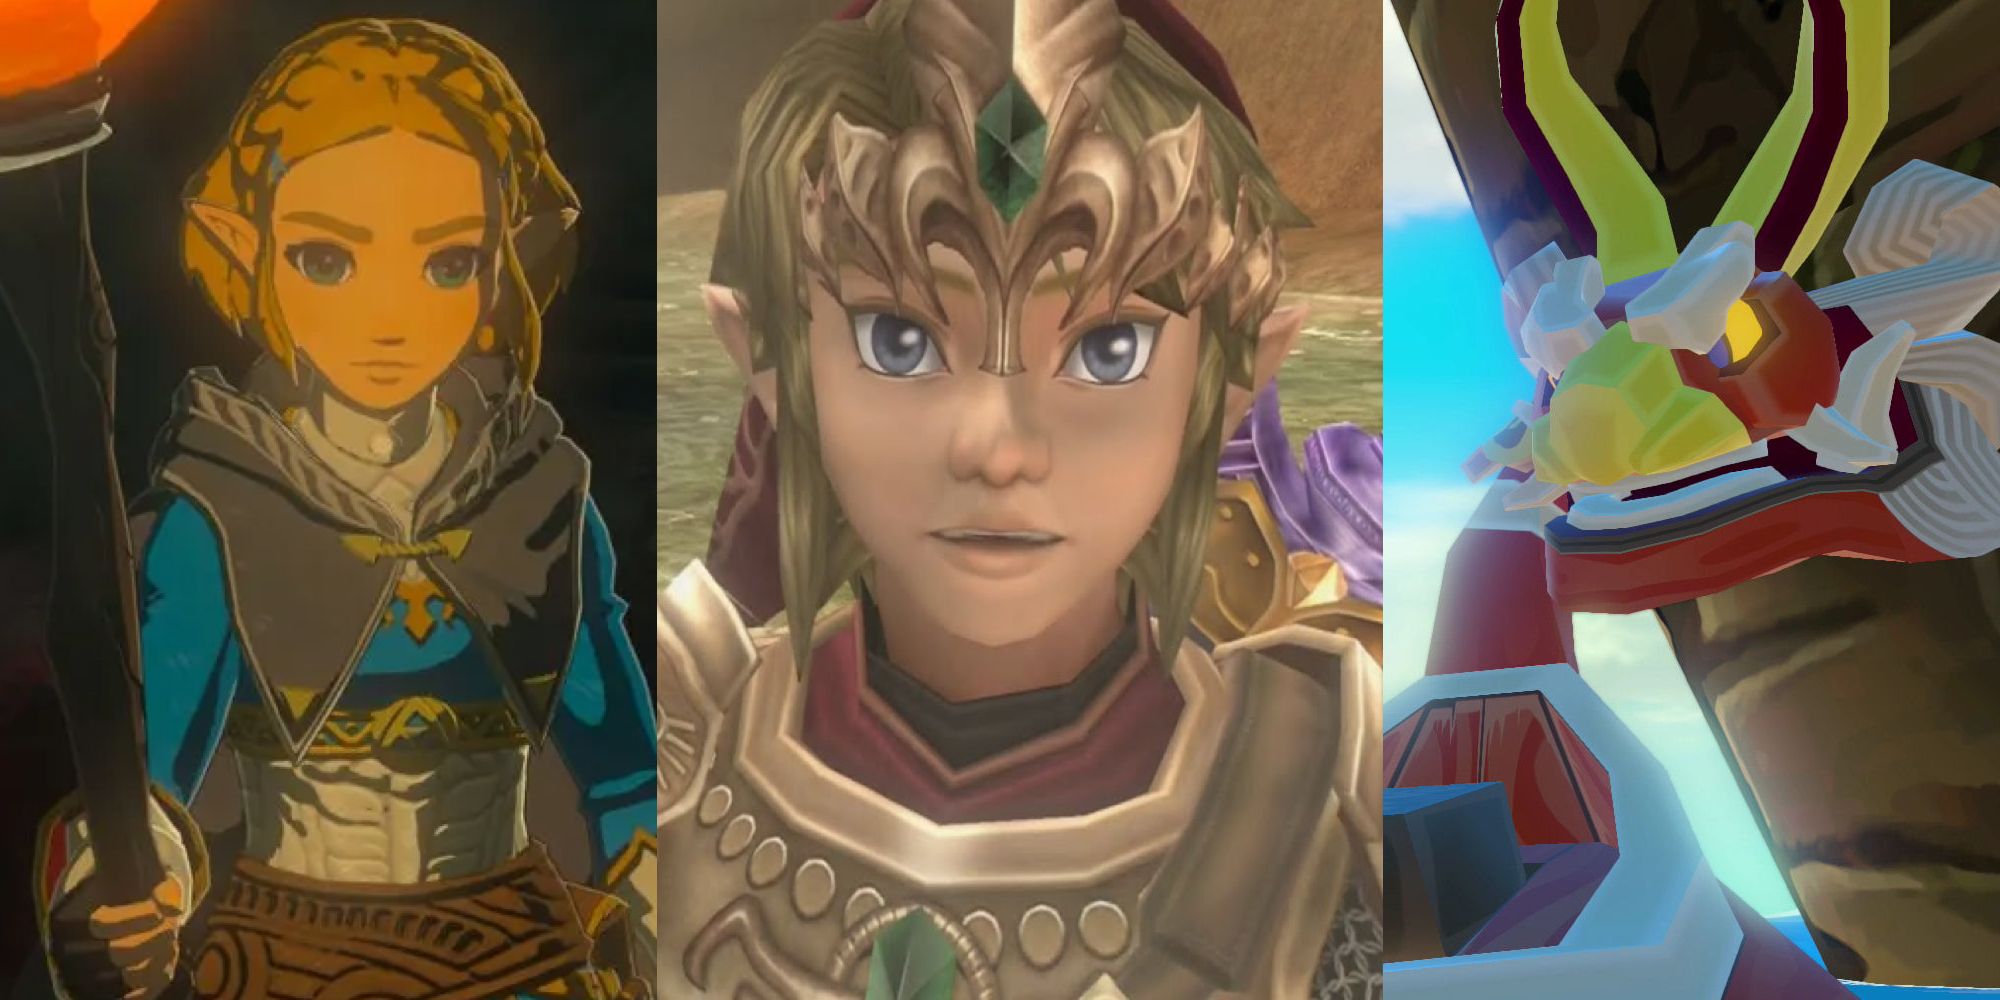 Zelda holding a torch; Link wearing Magic Armor; the King of Red Lions talking